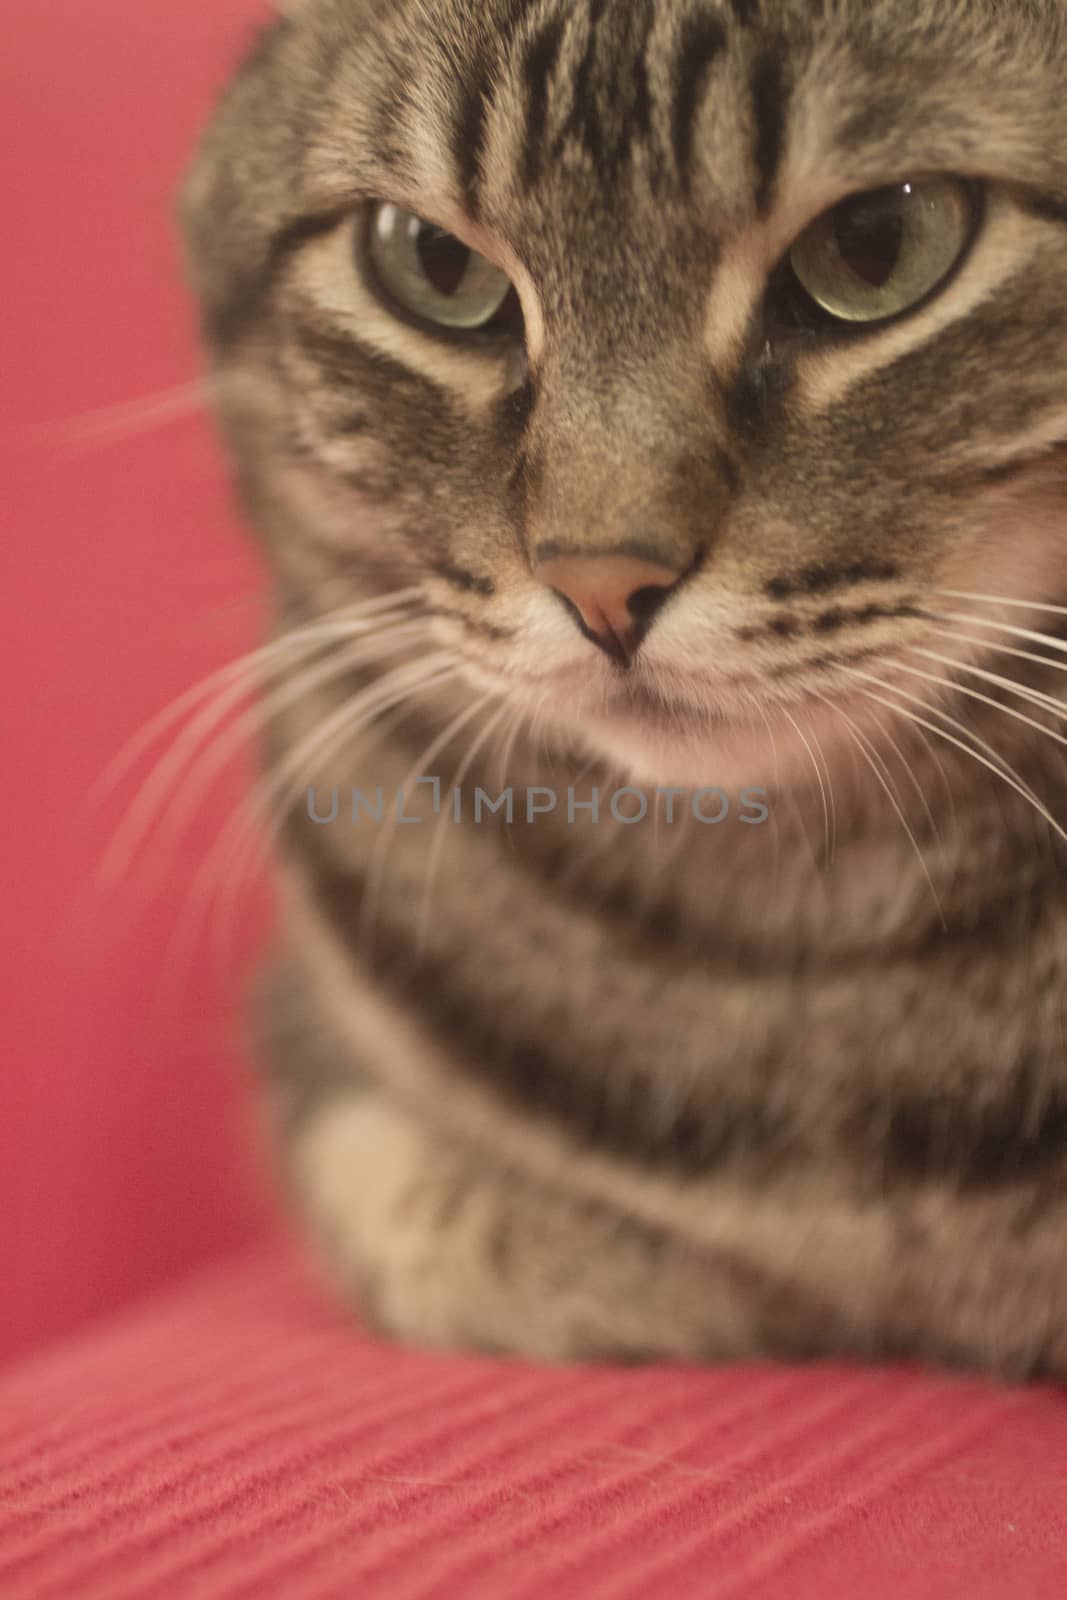 Tabby cat sitting looking on red sofa background by edwardolive